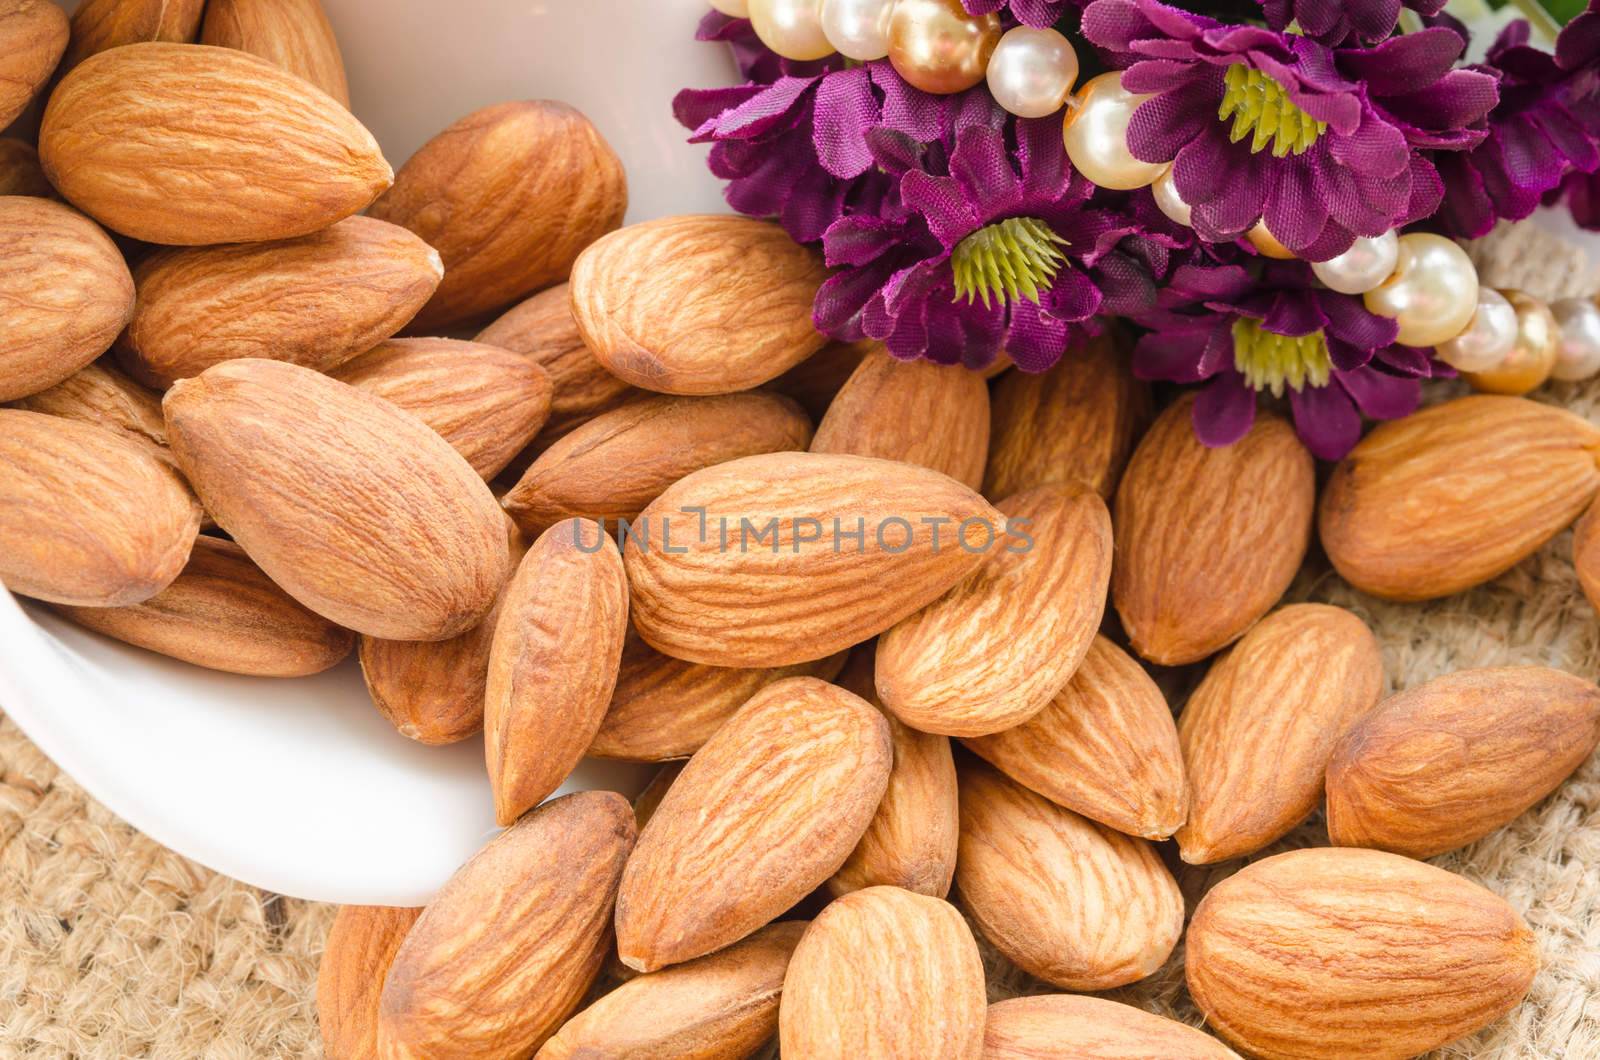 Raw almonds spilling out of small white bowl with flower on sack background.